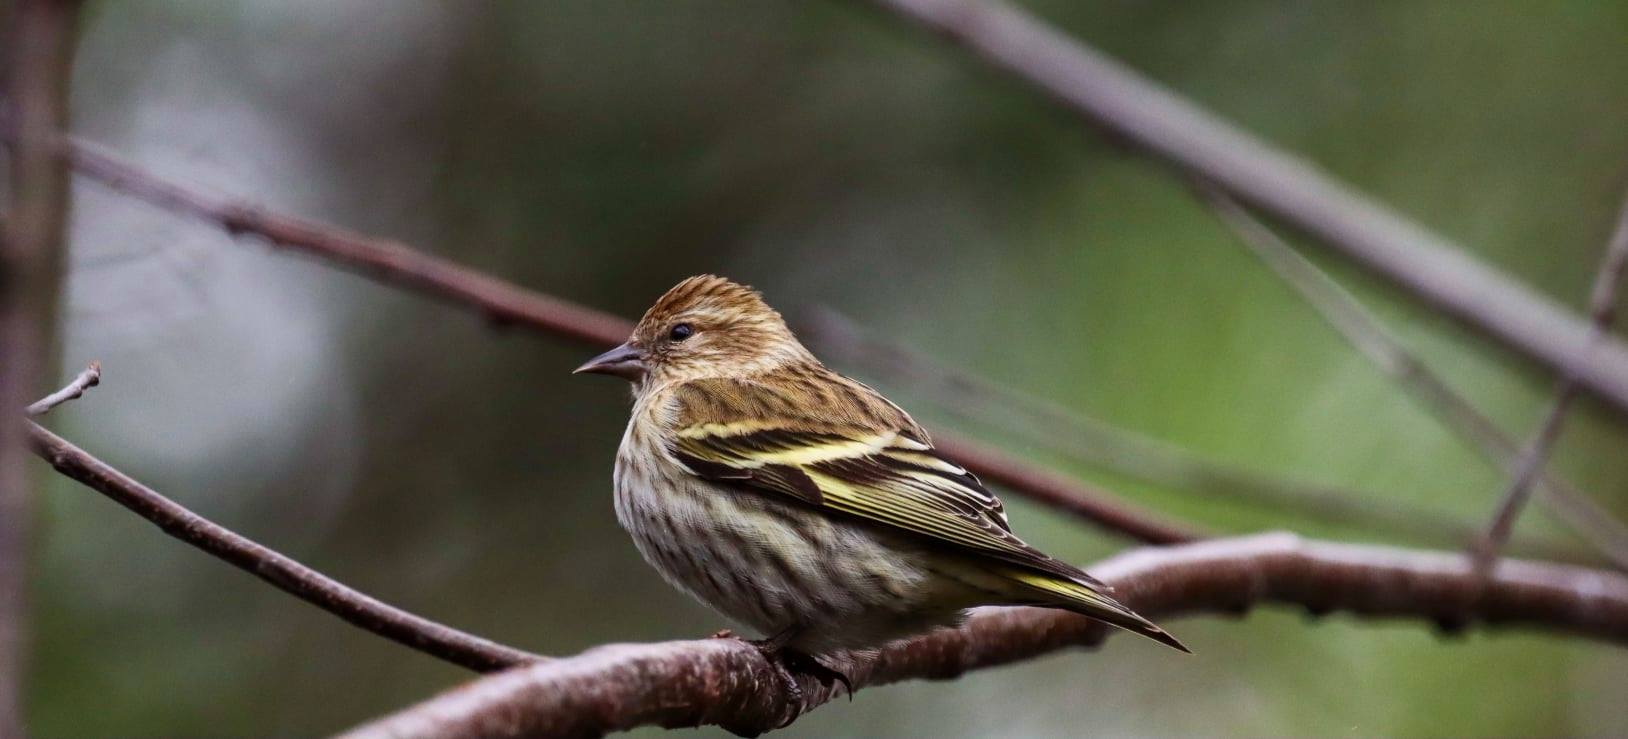 Pine Siskin Grace Simms Alabama Birding Trails Be on the lookout Birmingham for wintering birds in town (photos)